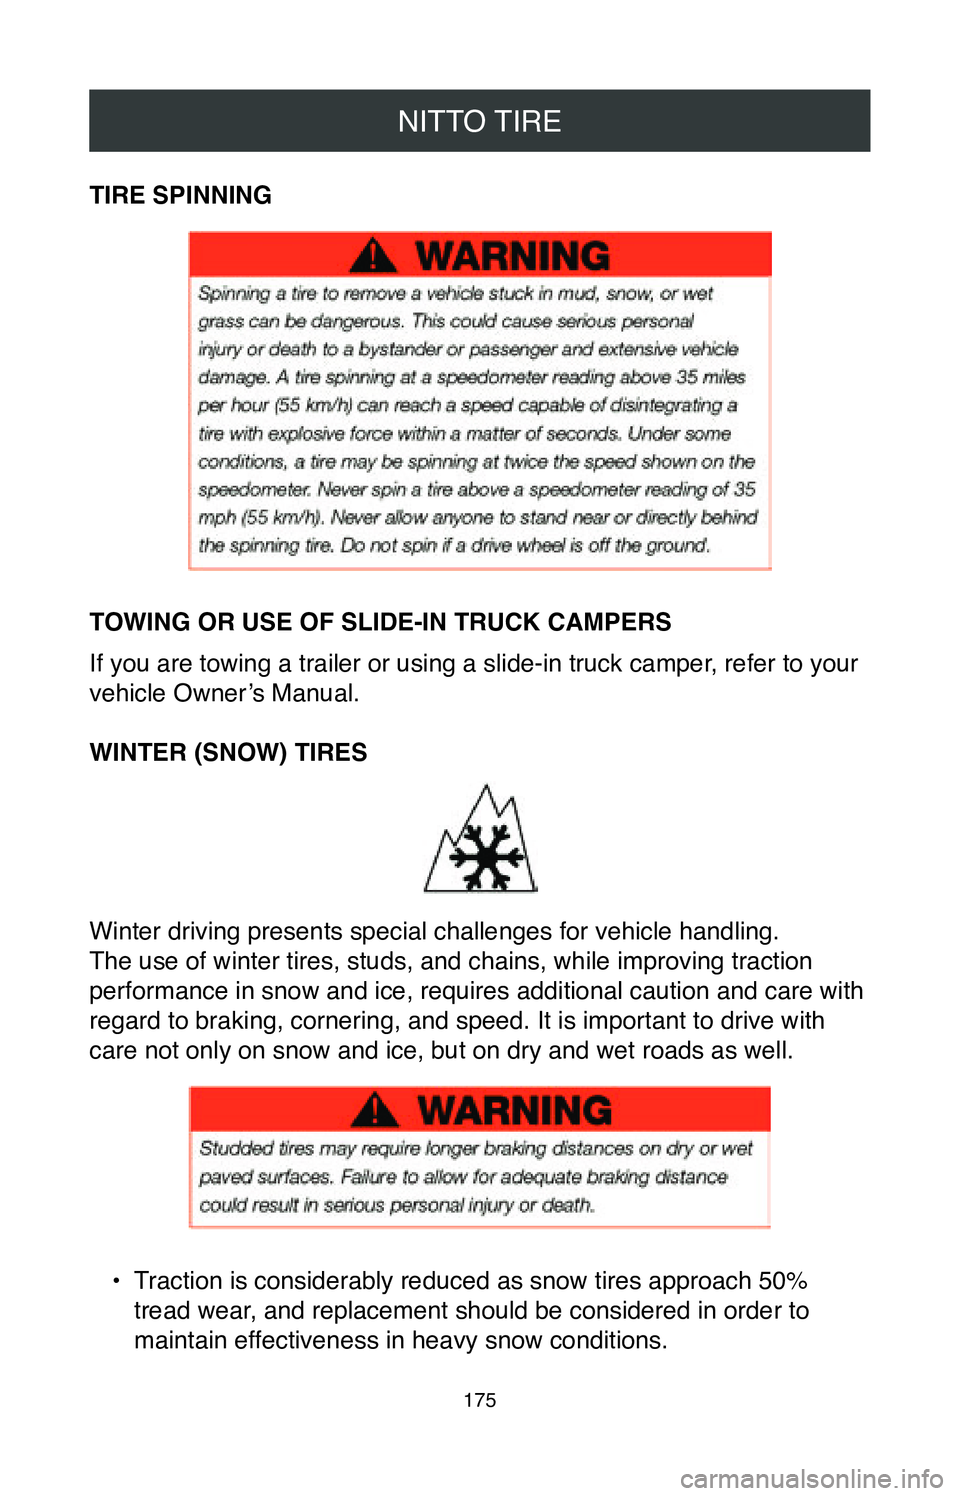 TOYOTA COROLLA HYBRID 2020  Warranties & Maintenance Guides (in English) NITTO TIRE
175
TIRE SPINNING
TOWING OR USE OF SLIDE-IN TRUCK CAMPERS
If you are towing a trailer or using a slide-in truck camper, refer to your 
vehicle Owner’s Manual.
WINTER (SNOW) TIRES
Winter d